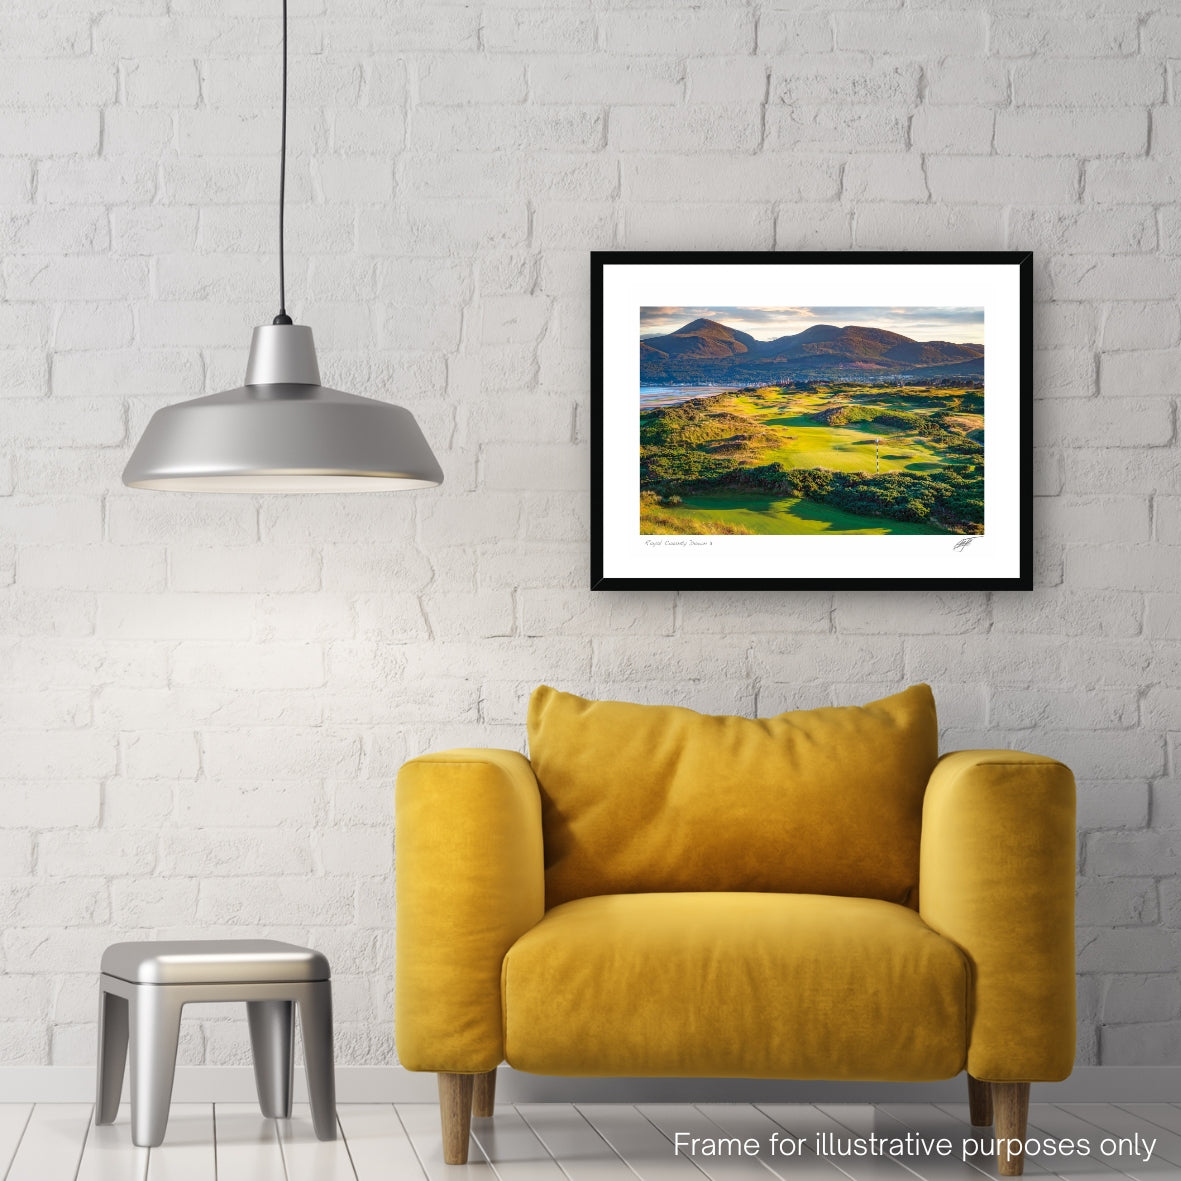 ROYAL COUNTY DOWN HOLE 3 PHOTOGRAPHY PRINT BY ADAM TOTH BLACK FRAME